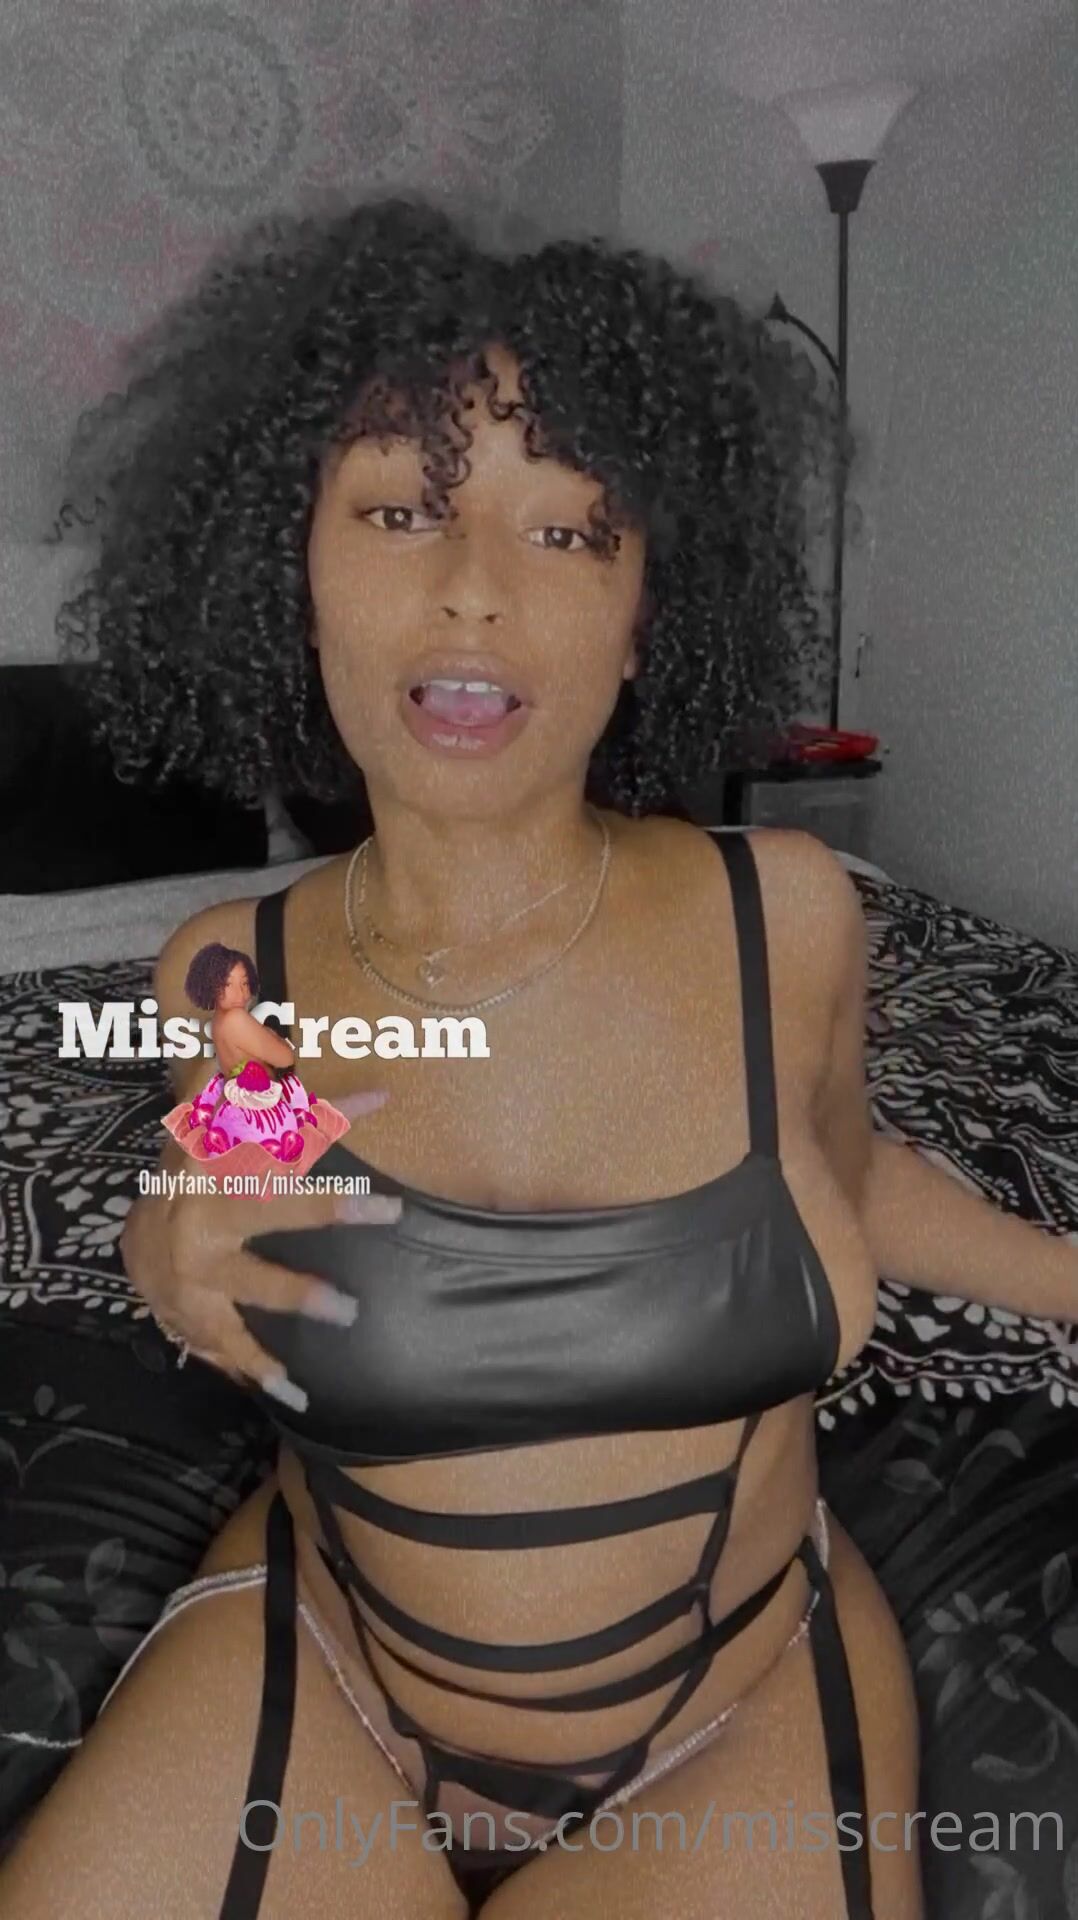 Watch online Cream aka Misscream OnlyFans - I just wanna be your favorite  on X-video